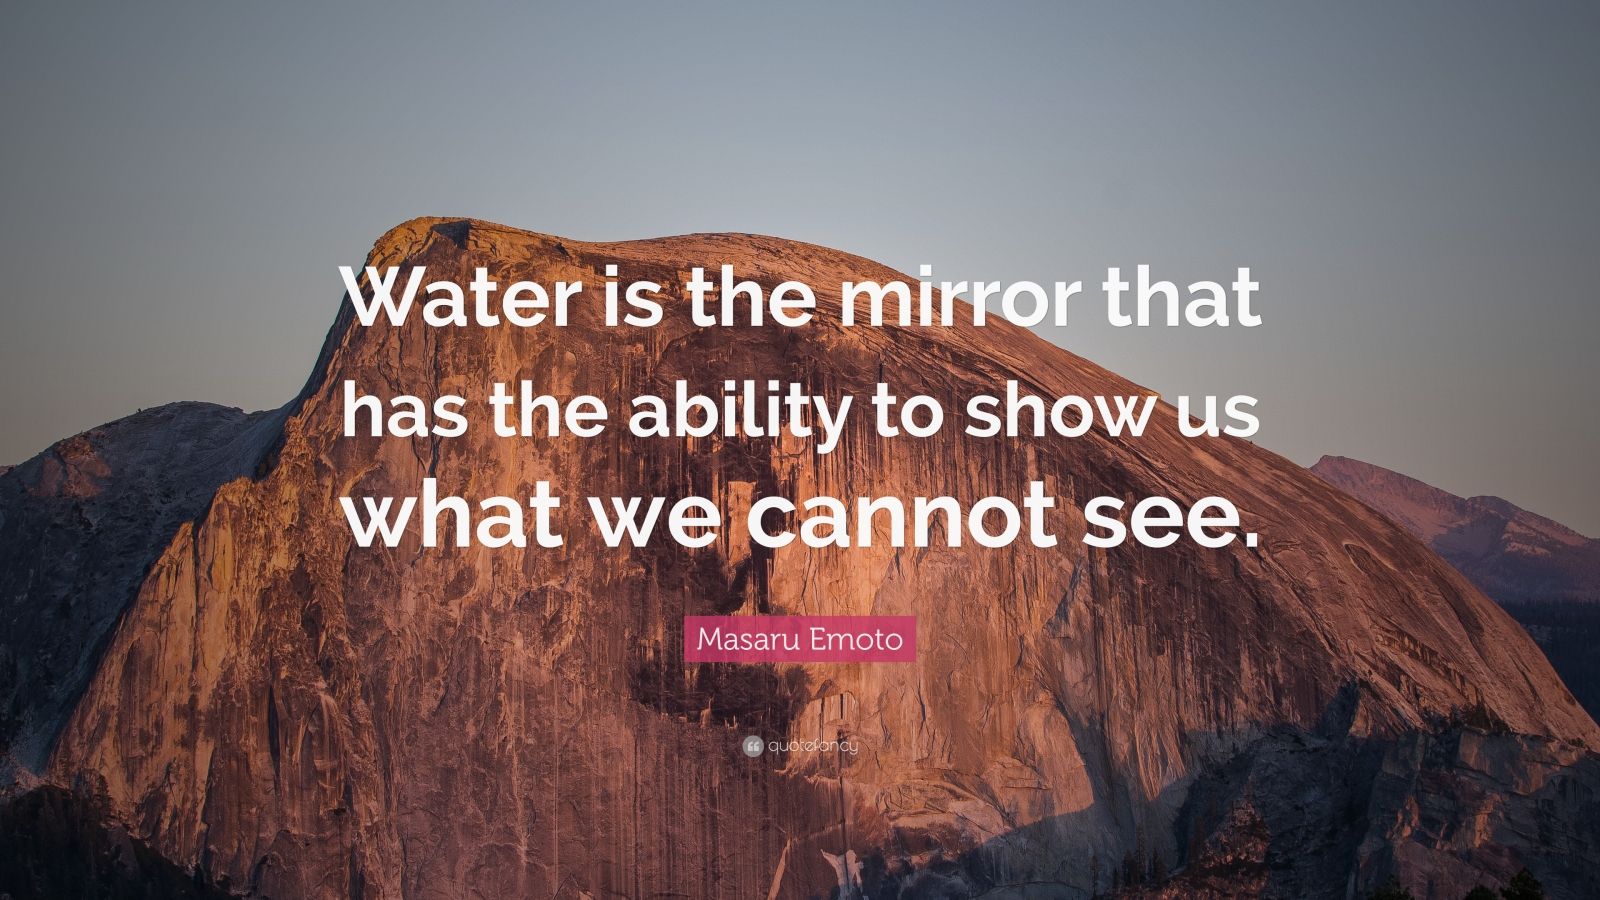 Masaru Emoto Quote: “Water is the mirror that has the ability to show ...